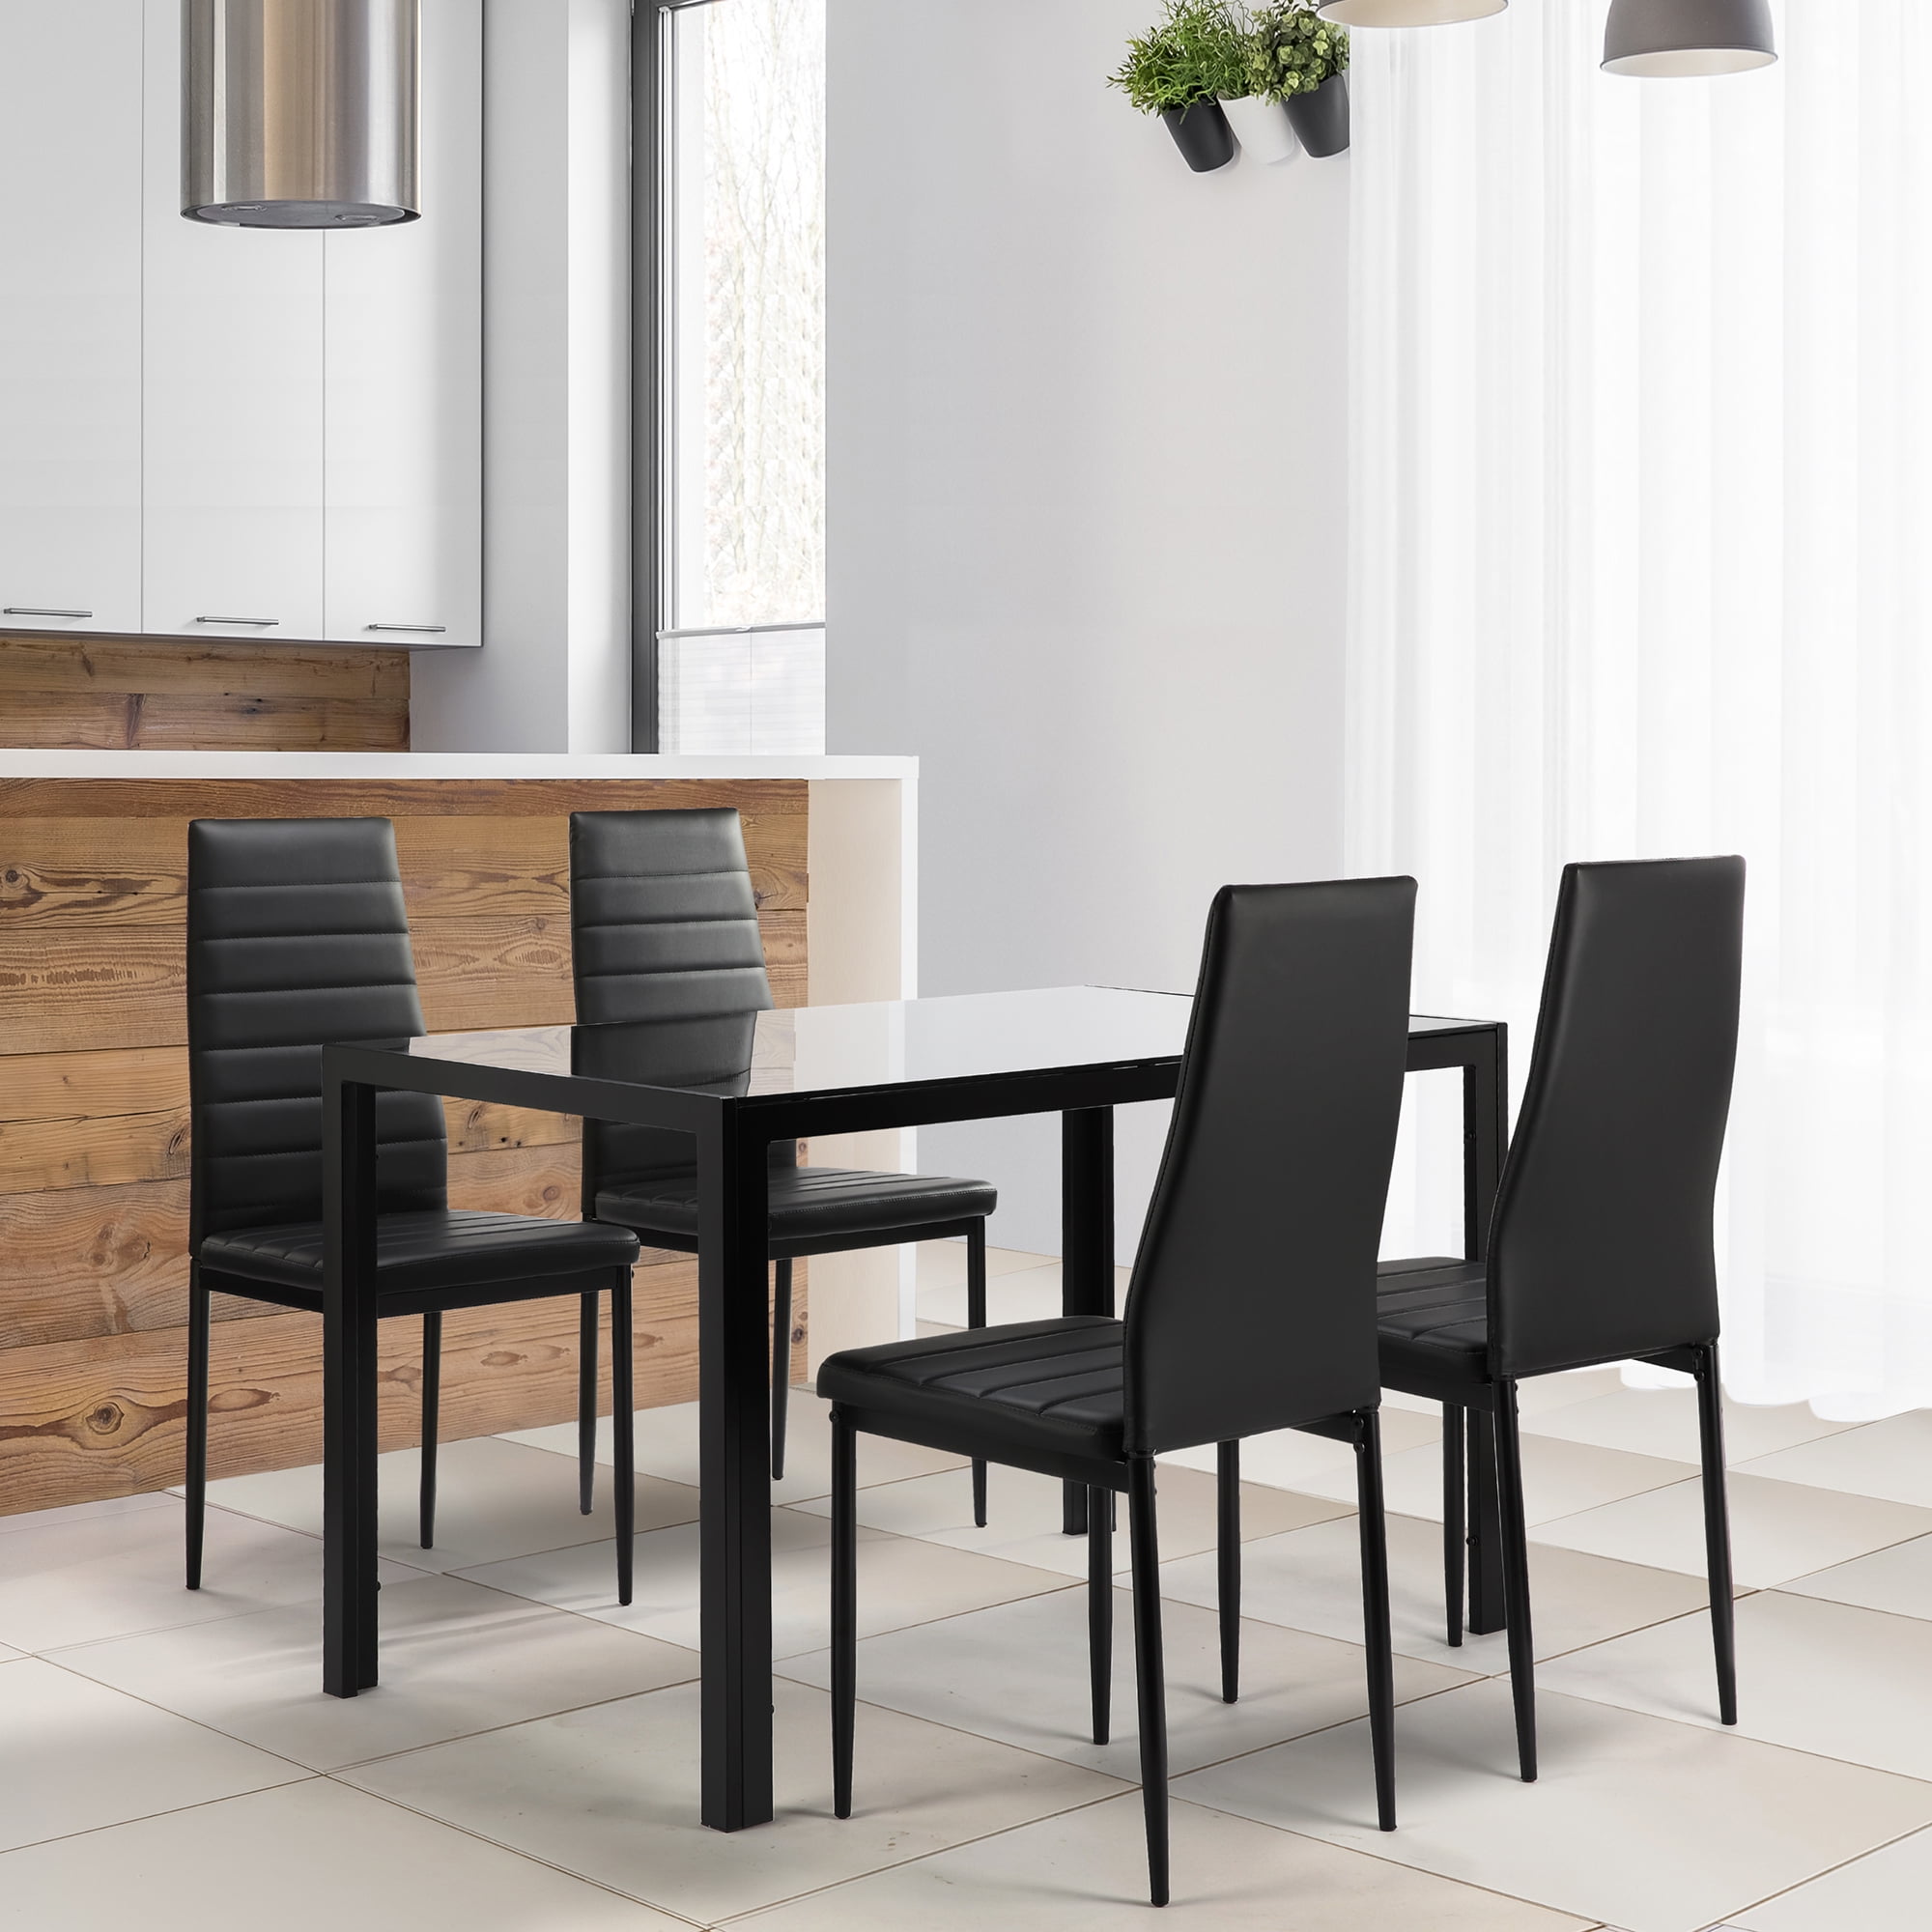 Kitchen Dining Table Set, High Back Dining Room Chairs Set Of 4